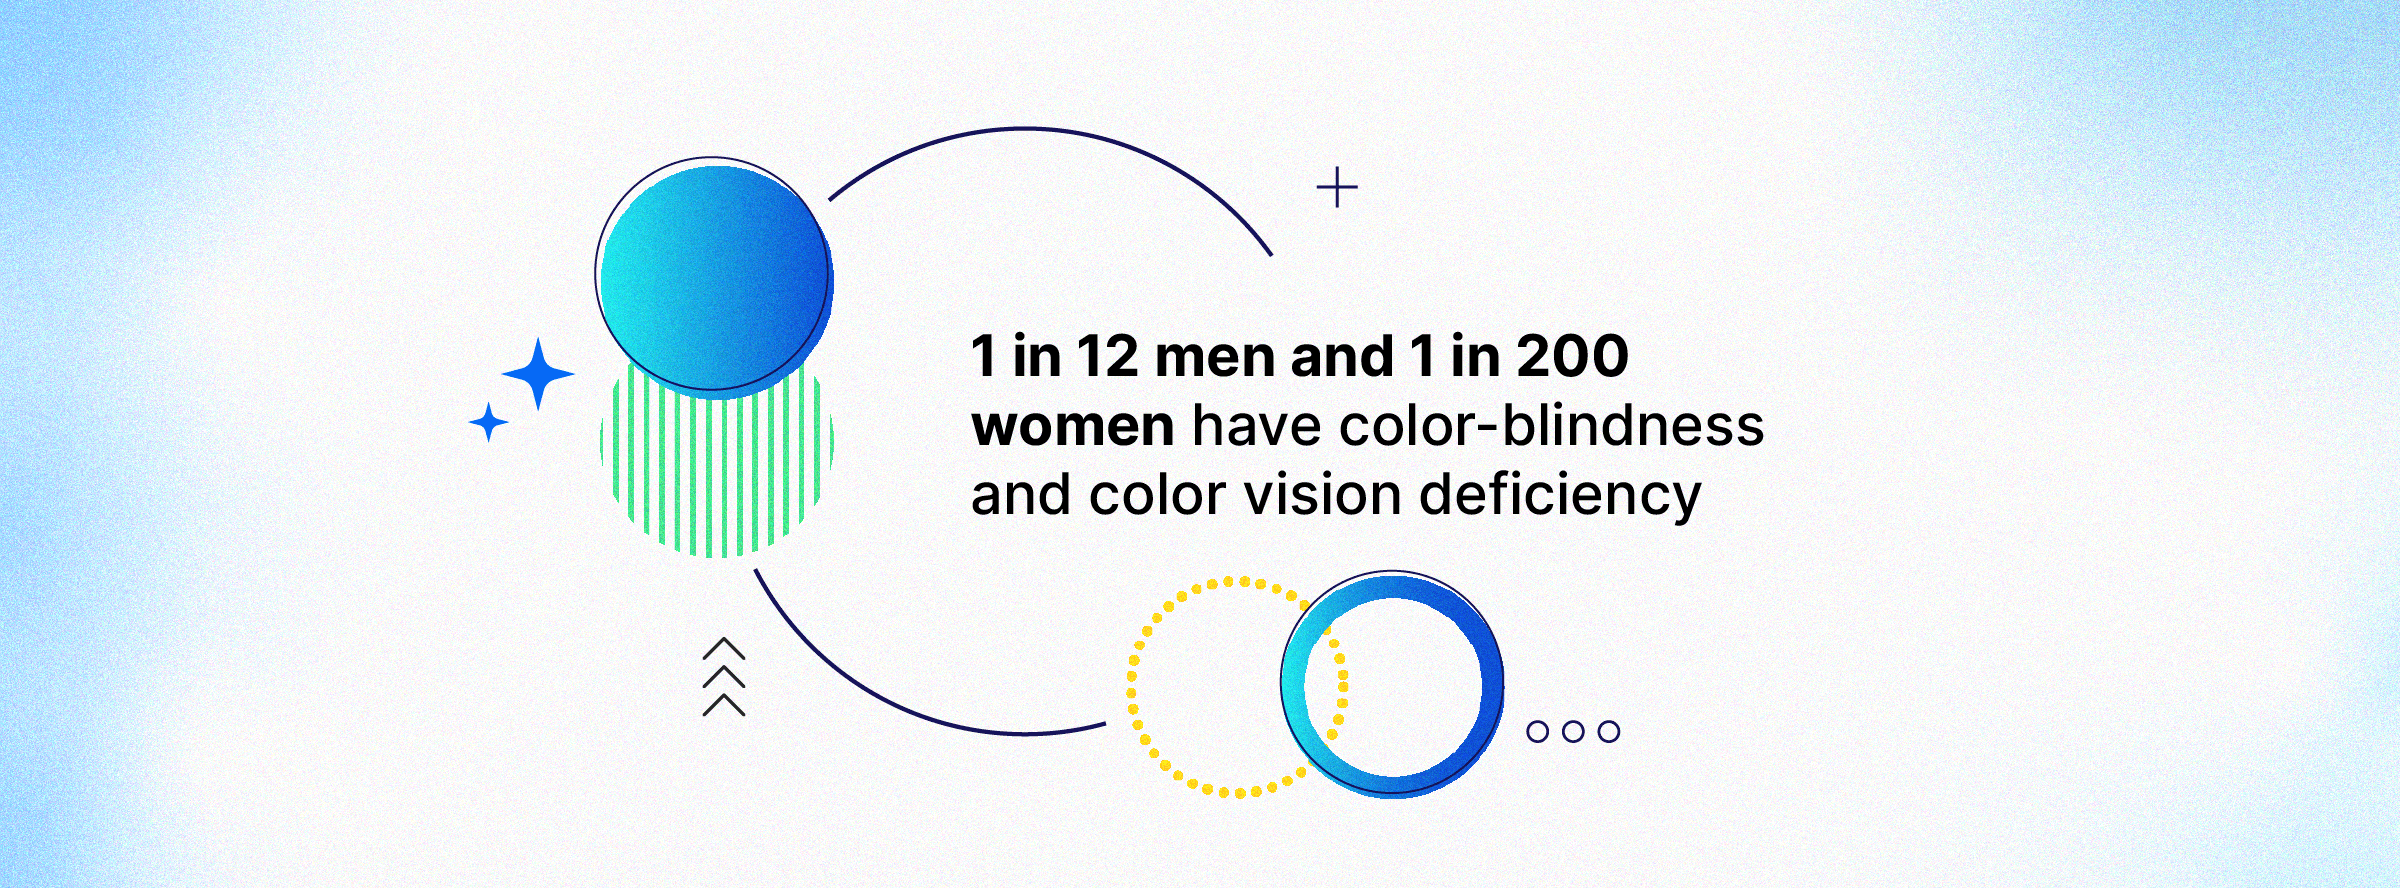 Blockquote: 1 in 12 men and the 1 in 200 women have color-blindness and color vision deficiency